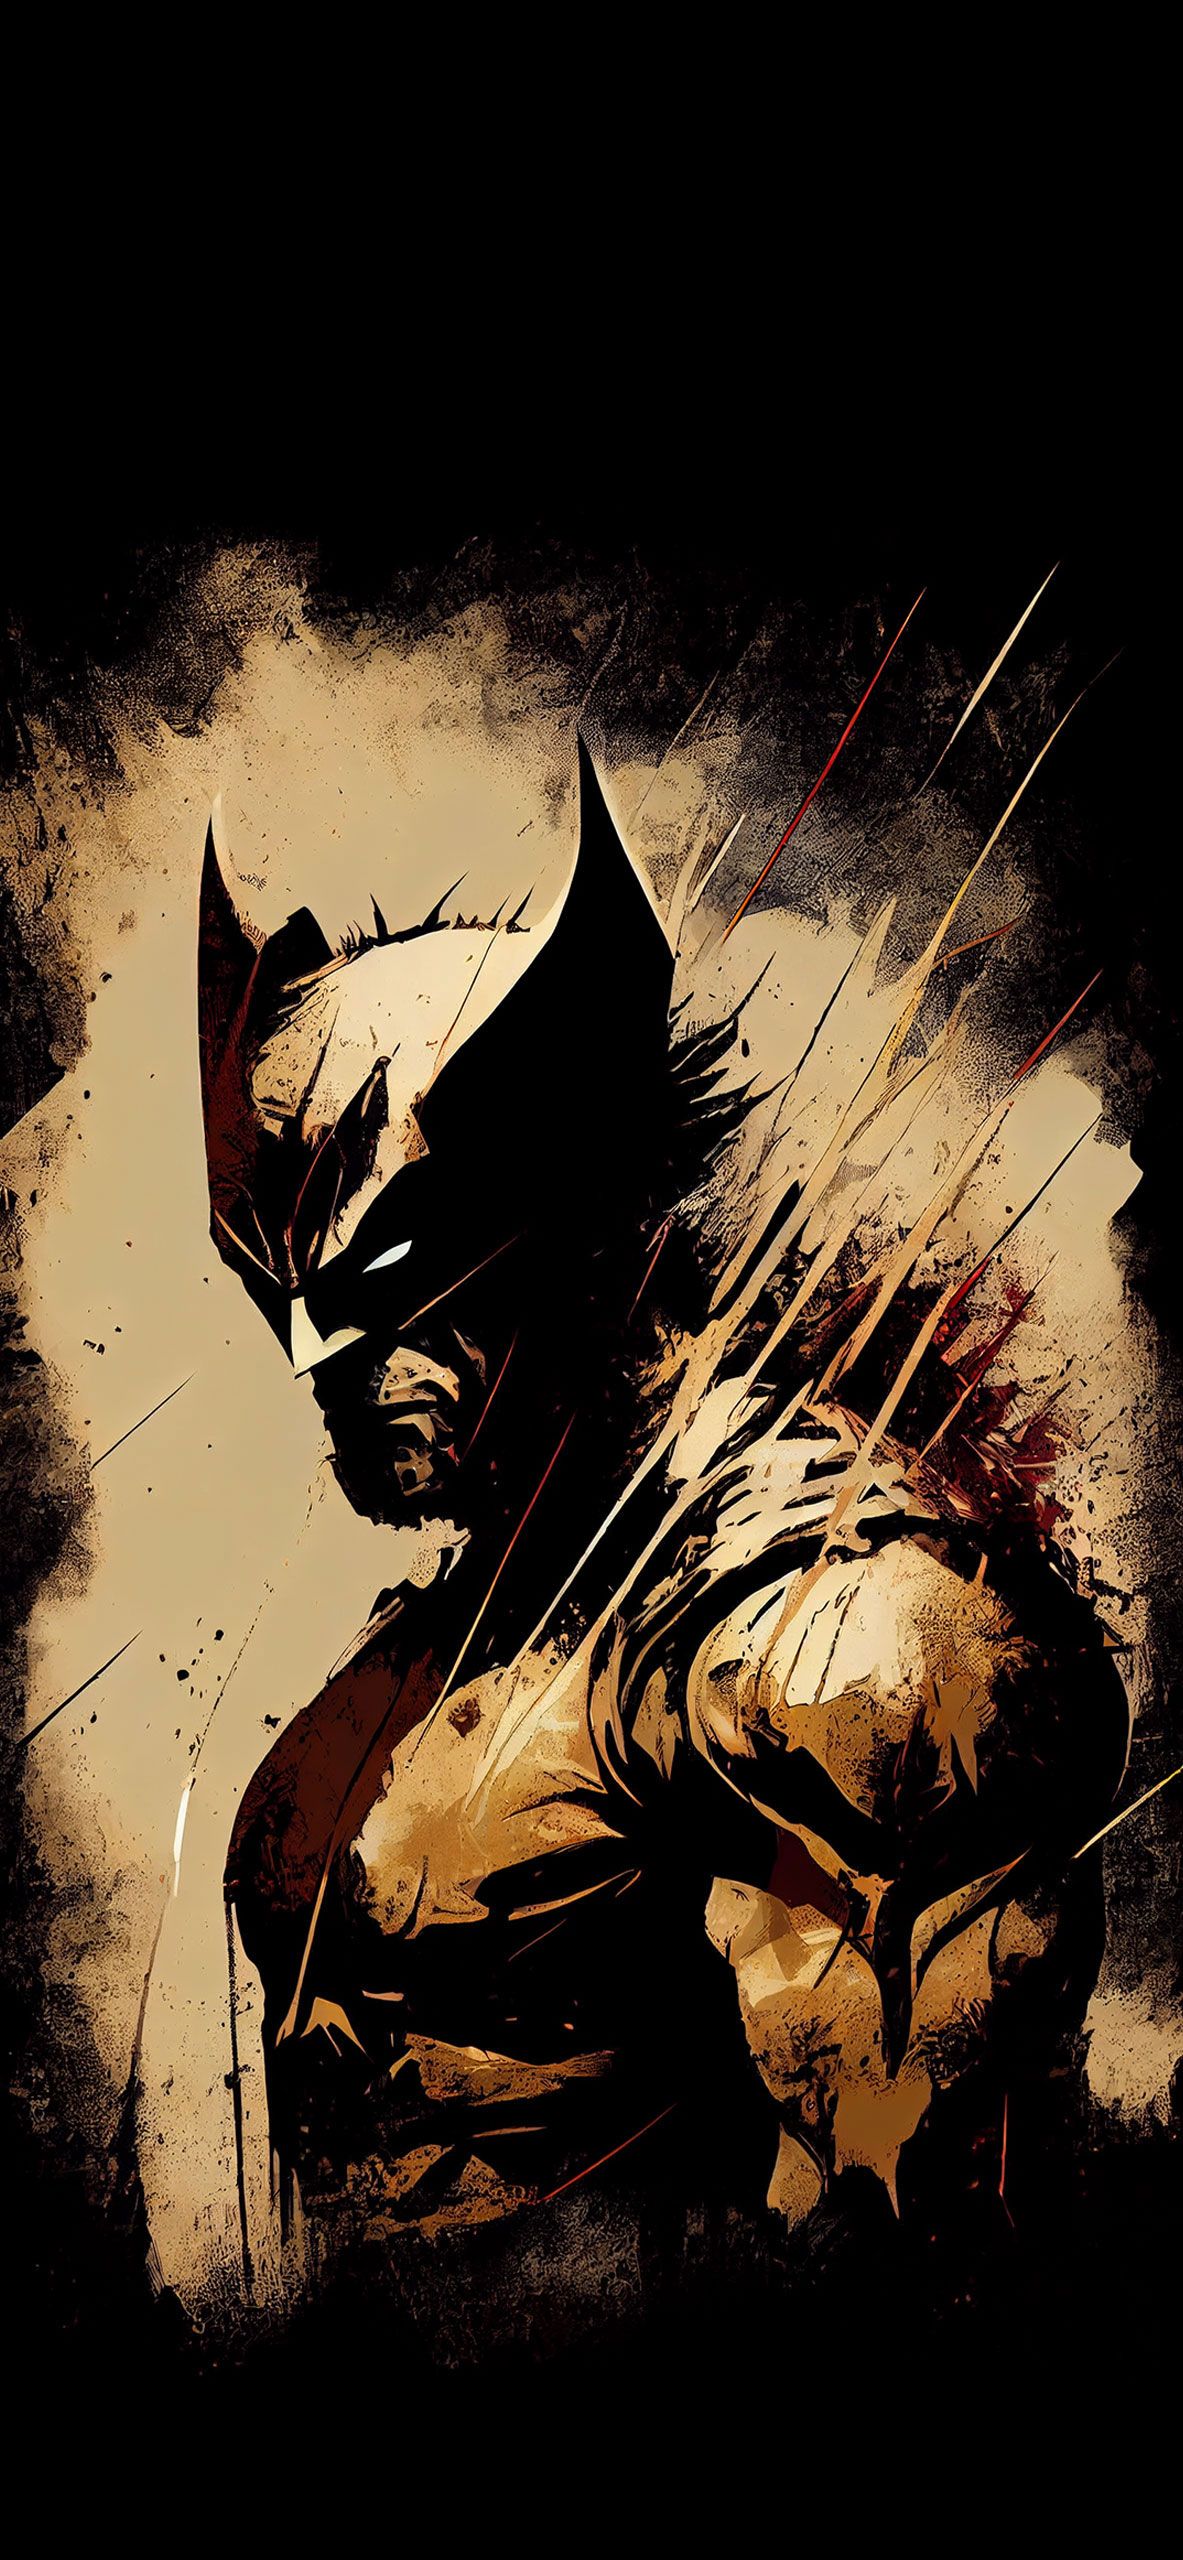 Iphone wallpaper wolverine - The best selection of royalty free wolverine silhouette vector art, graphics and stock illustrations. - Marvel